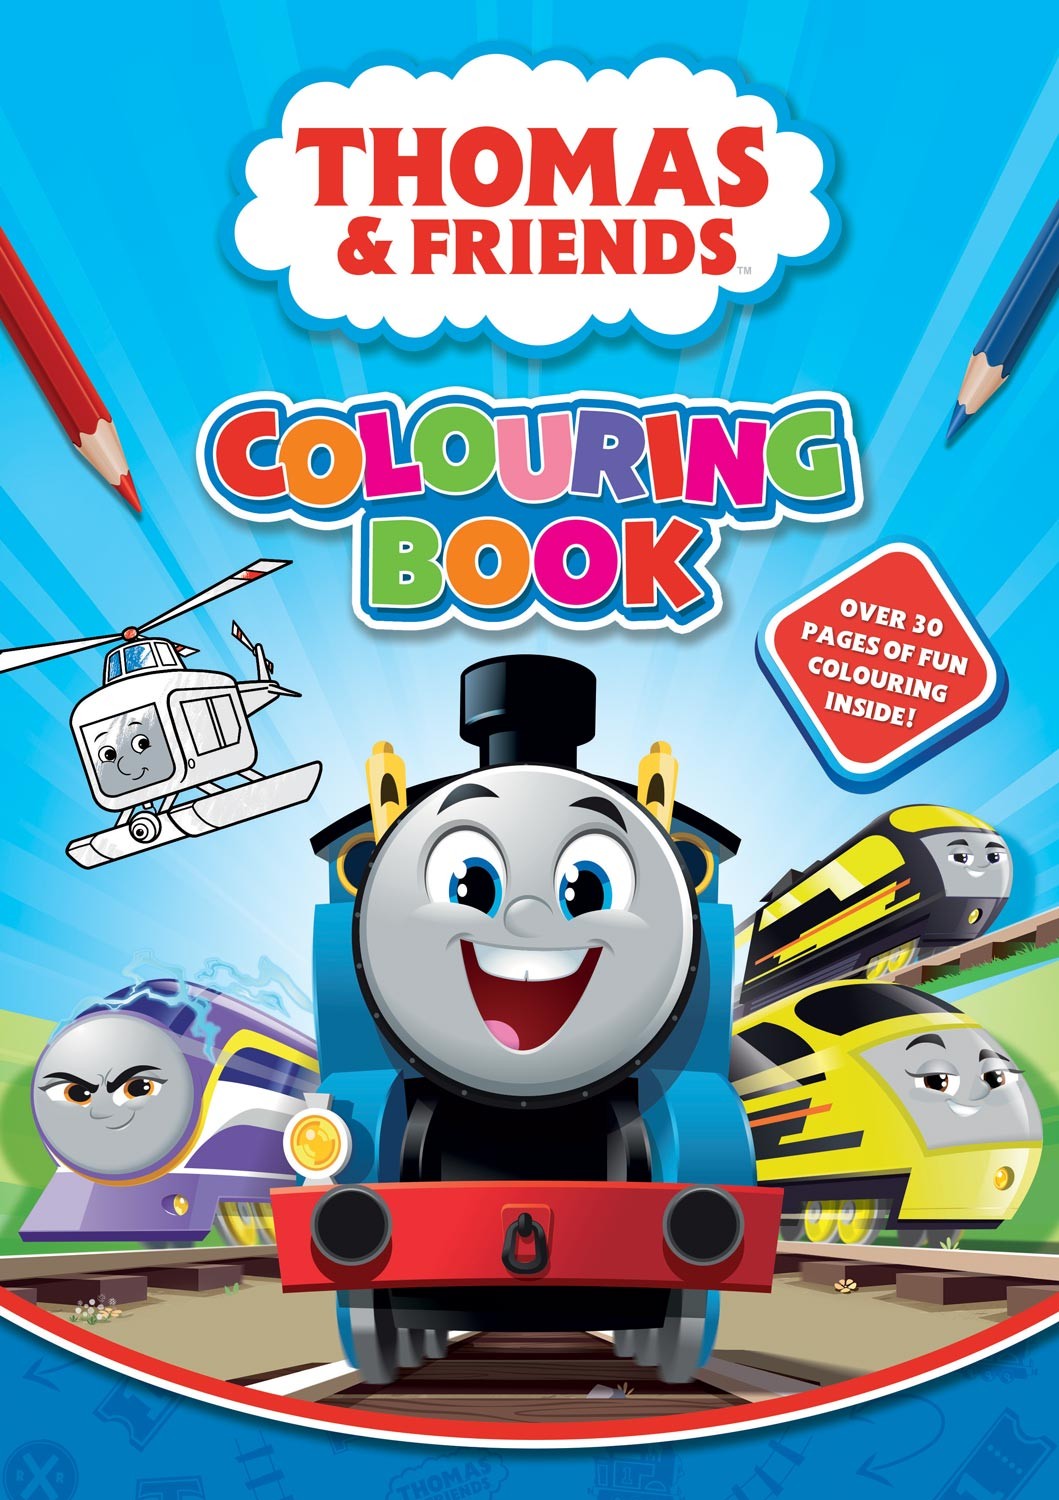 View Thomas Friends Colouring Book information